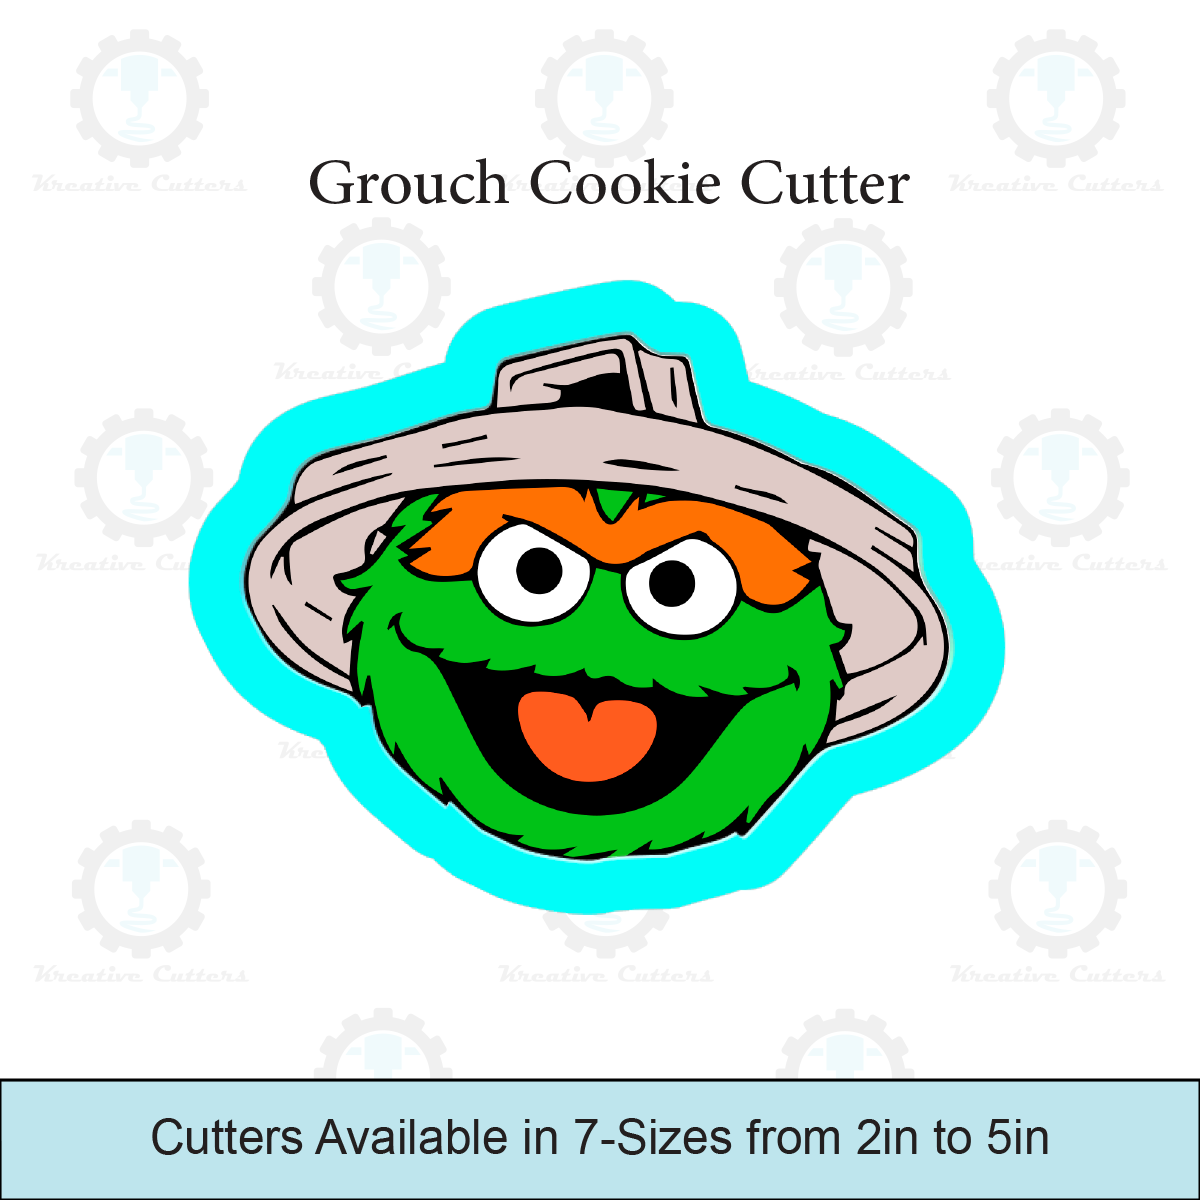 Grouch Cookie Cutter